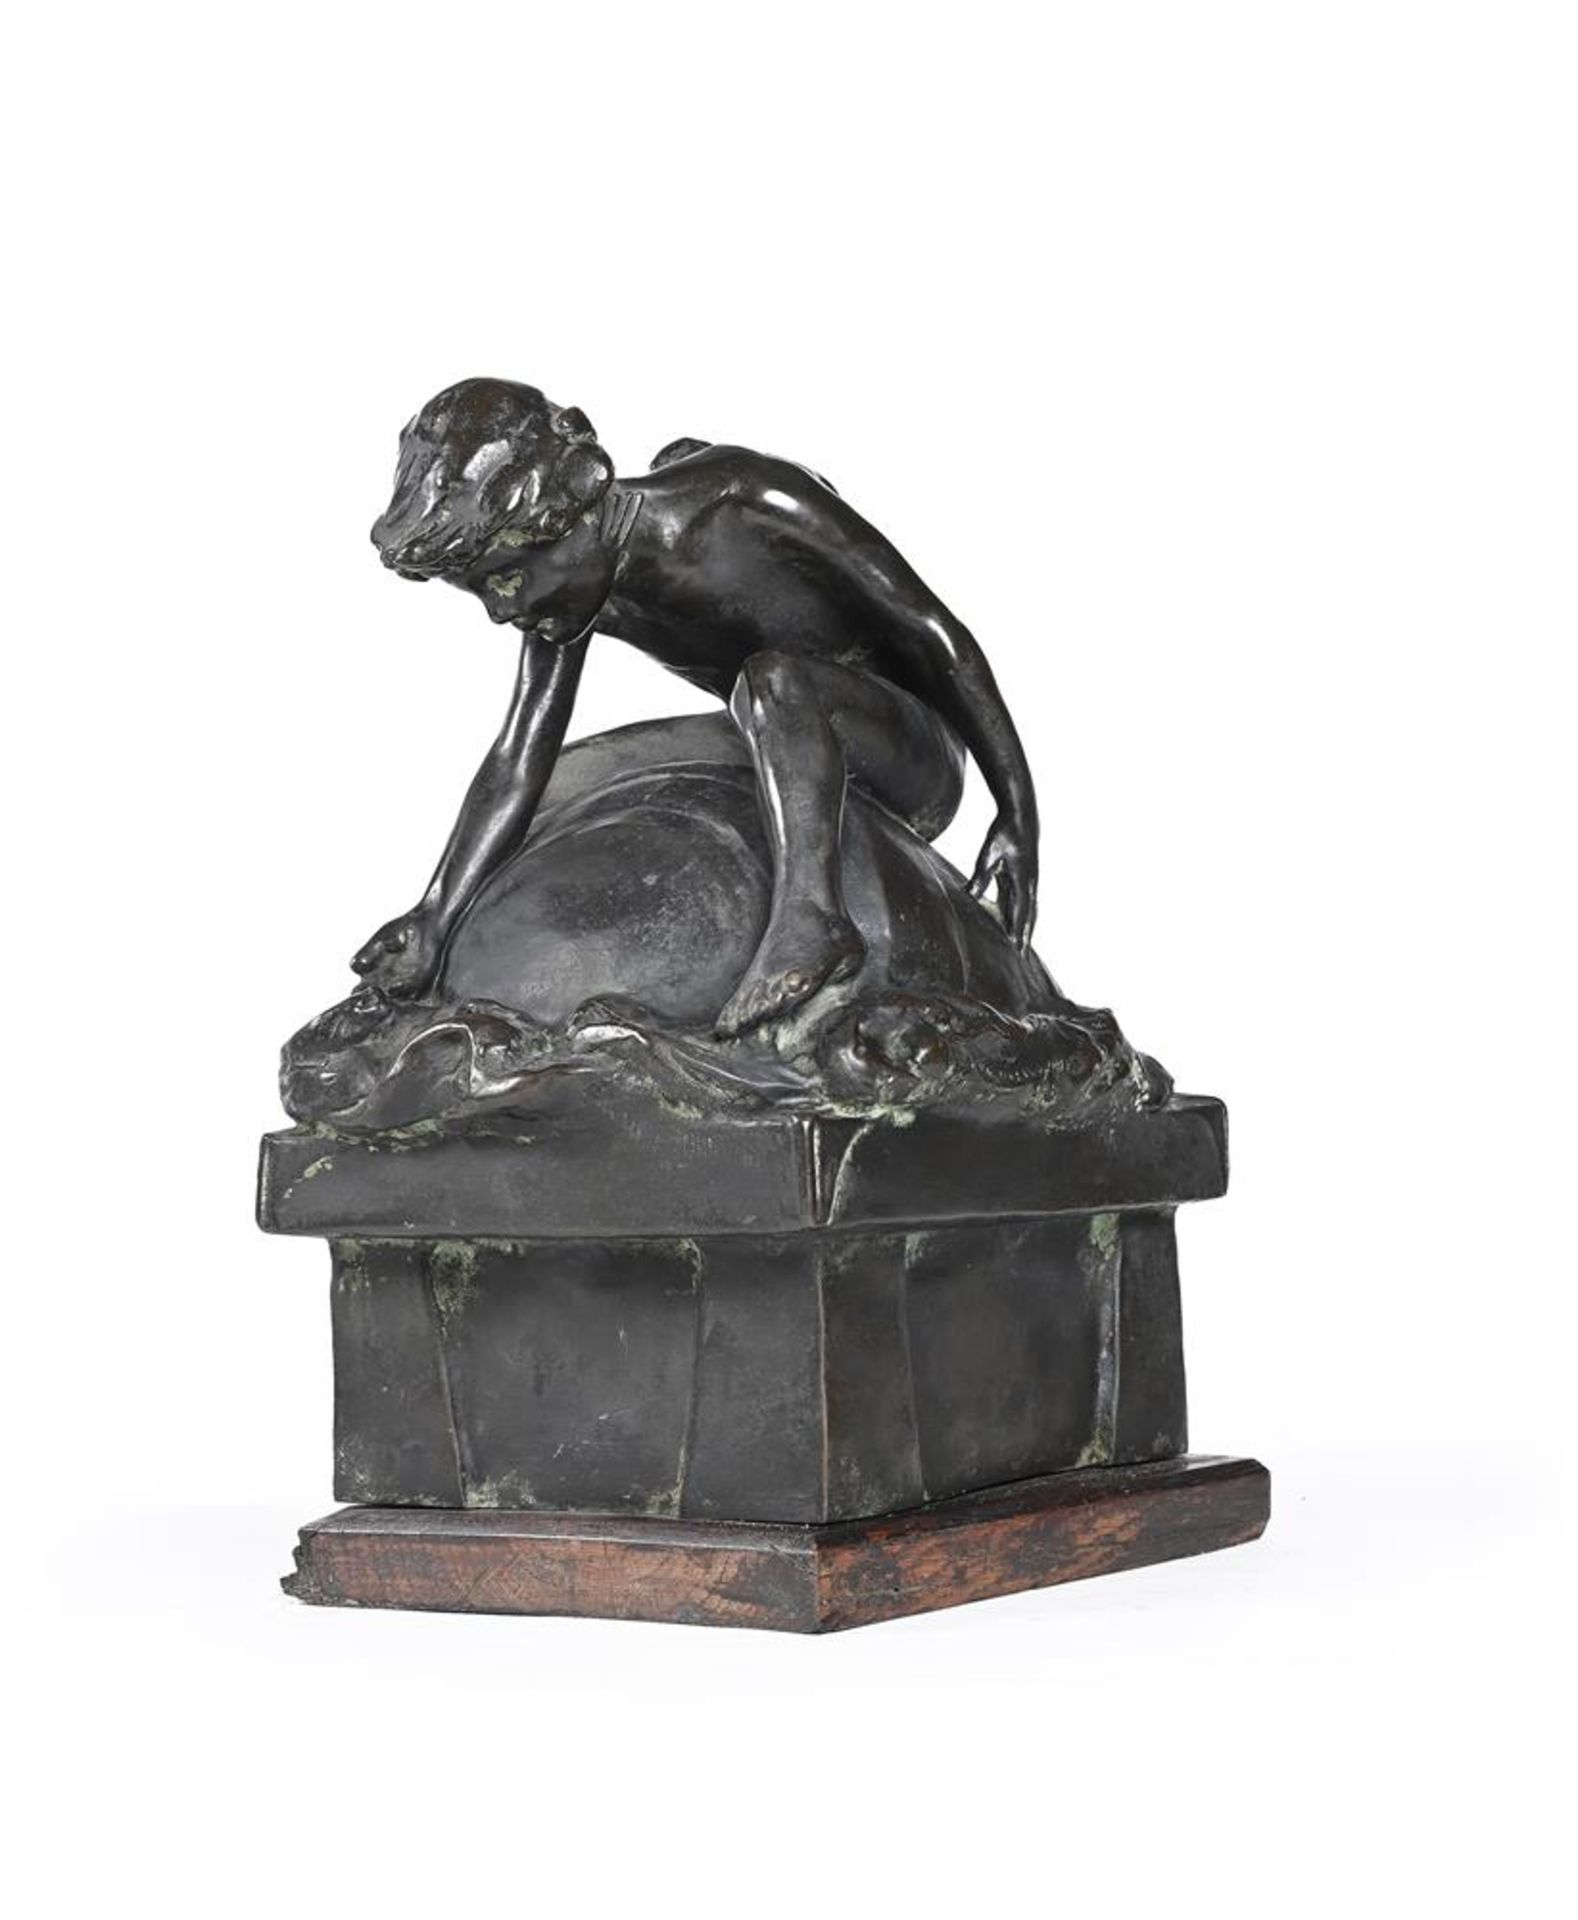 RUBY LEVICK BAILEY (WELSH, 1871-1940), A BRONZE GROUP OF A MERCHILD ON A FLOATING BARREL, DATED 1912 - Image 2 of 4